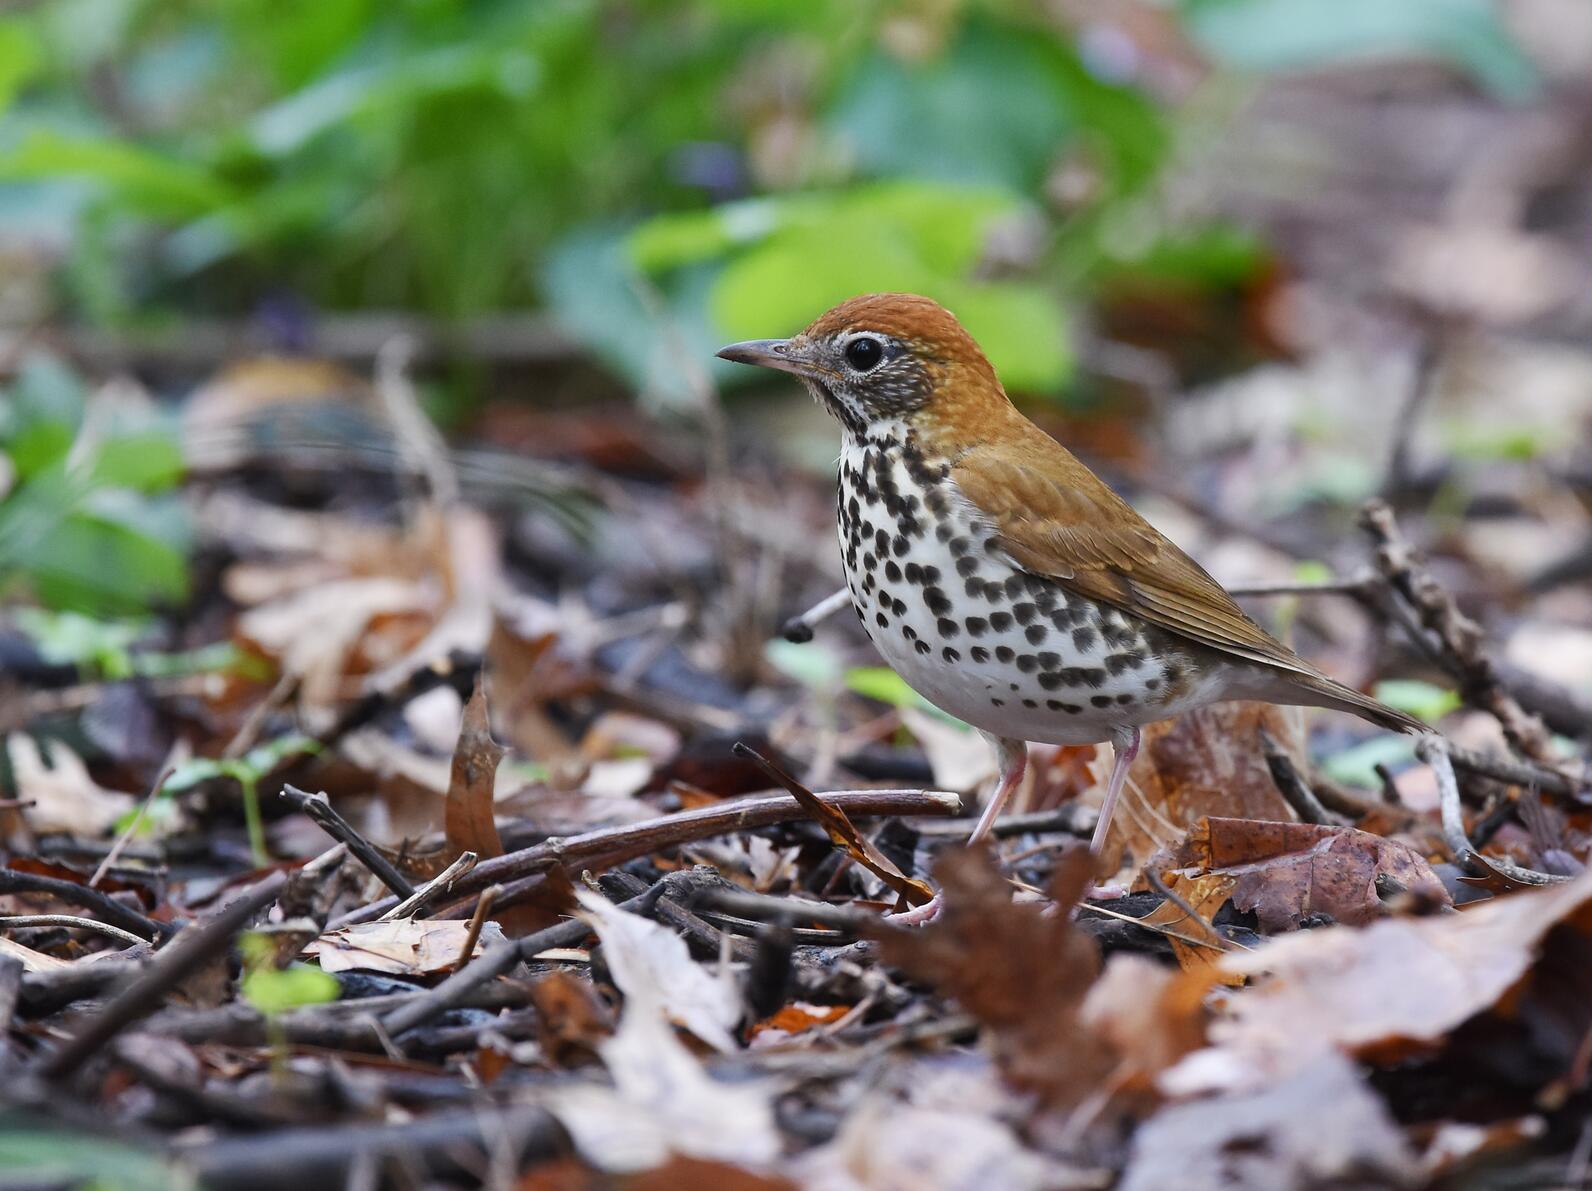 A Wood Thrush stands on the ground, surrounded by leaves.